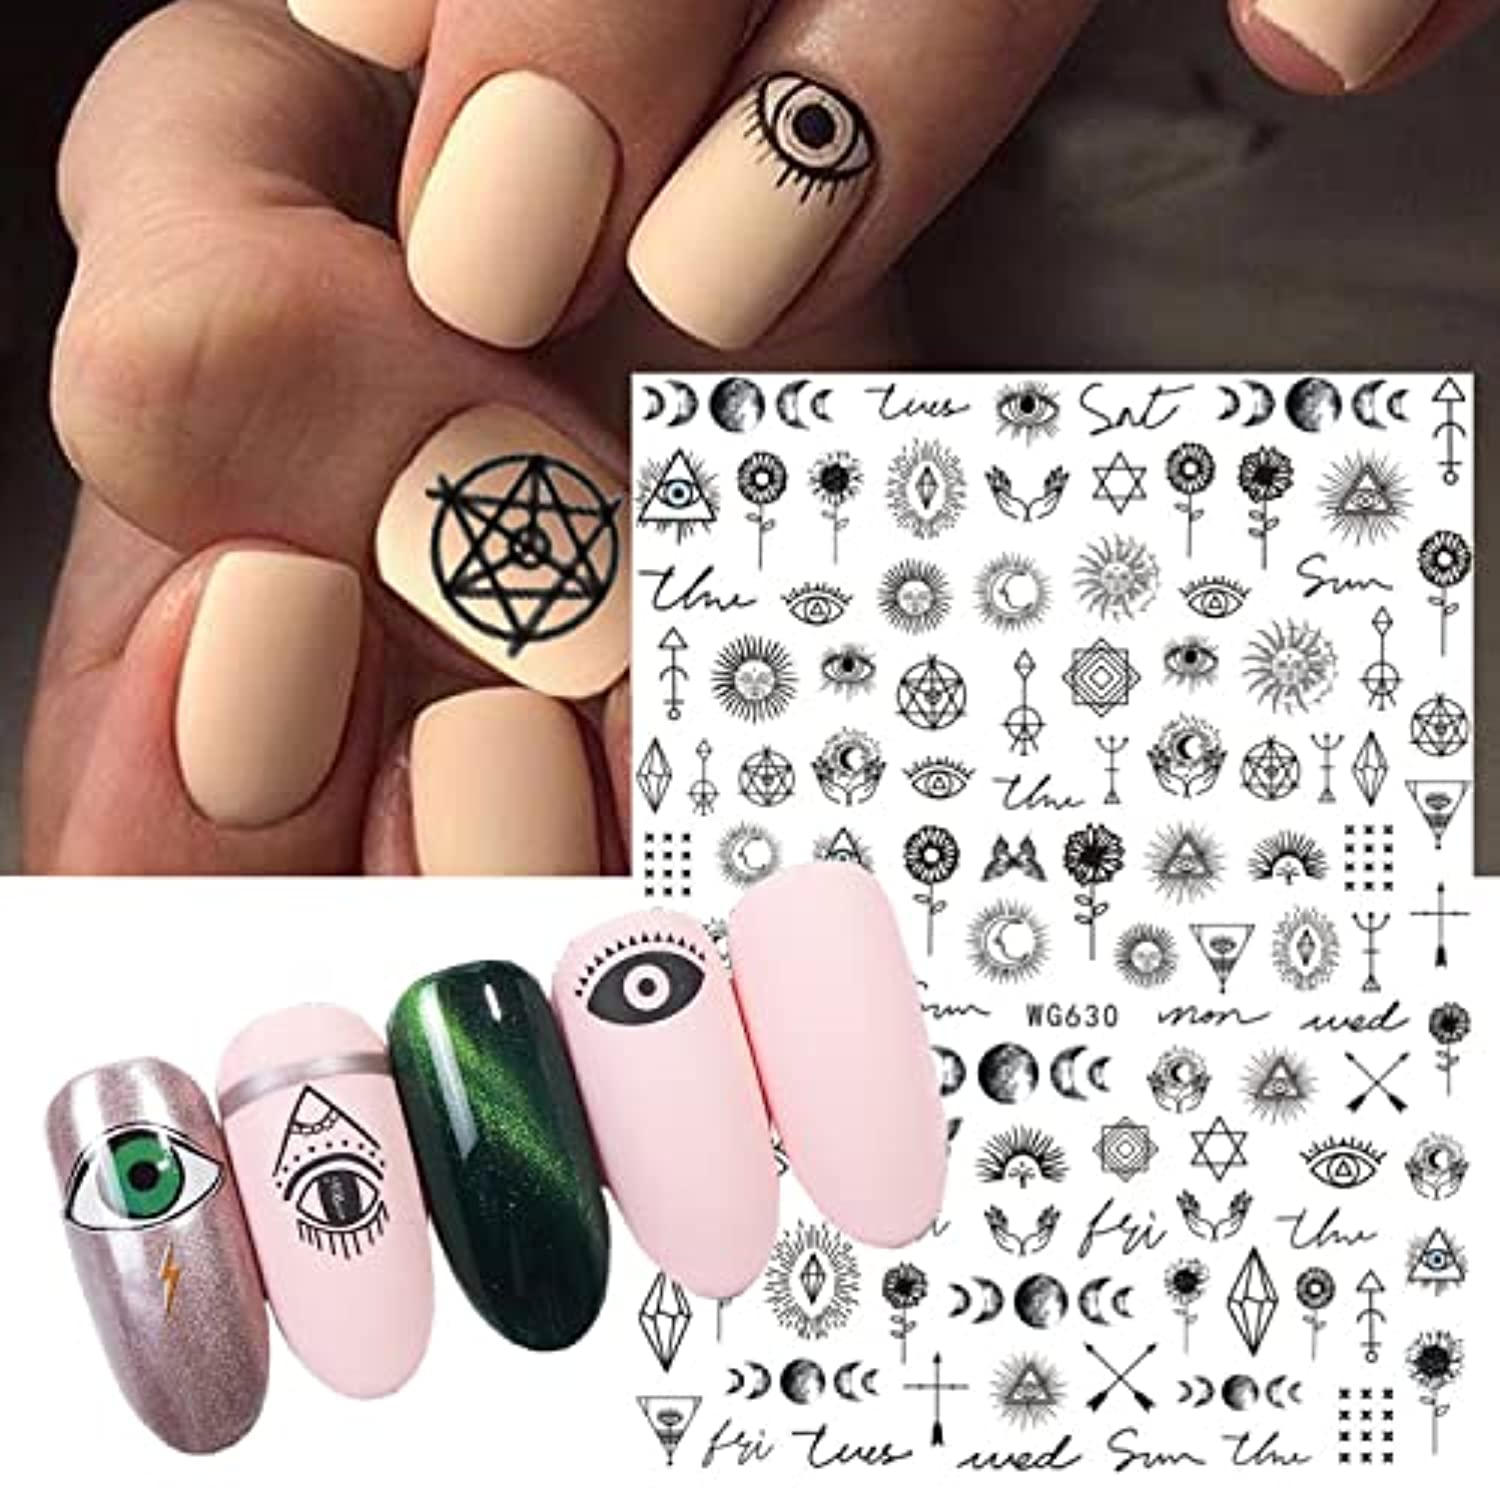 Indian Nail Art Stickers, Feather Alien Moon Star Eyes Tribal Totem Skull Nail Sticker, 3D Self-Adhesive Nail Art Decals Design, Nail Decal Supplies for Women Manicure DIY Nail Decoration (6 Sheets)